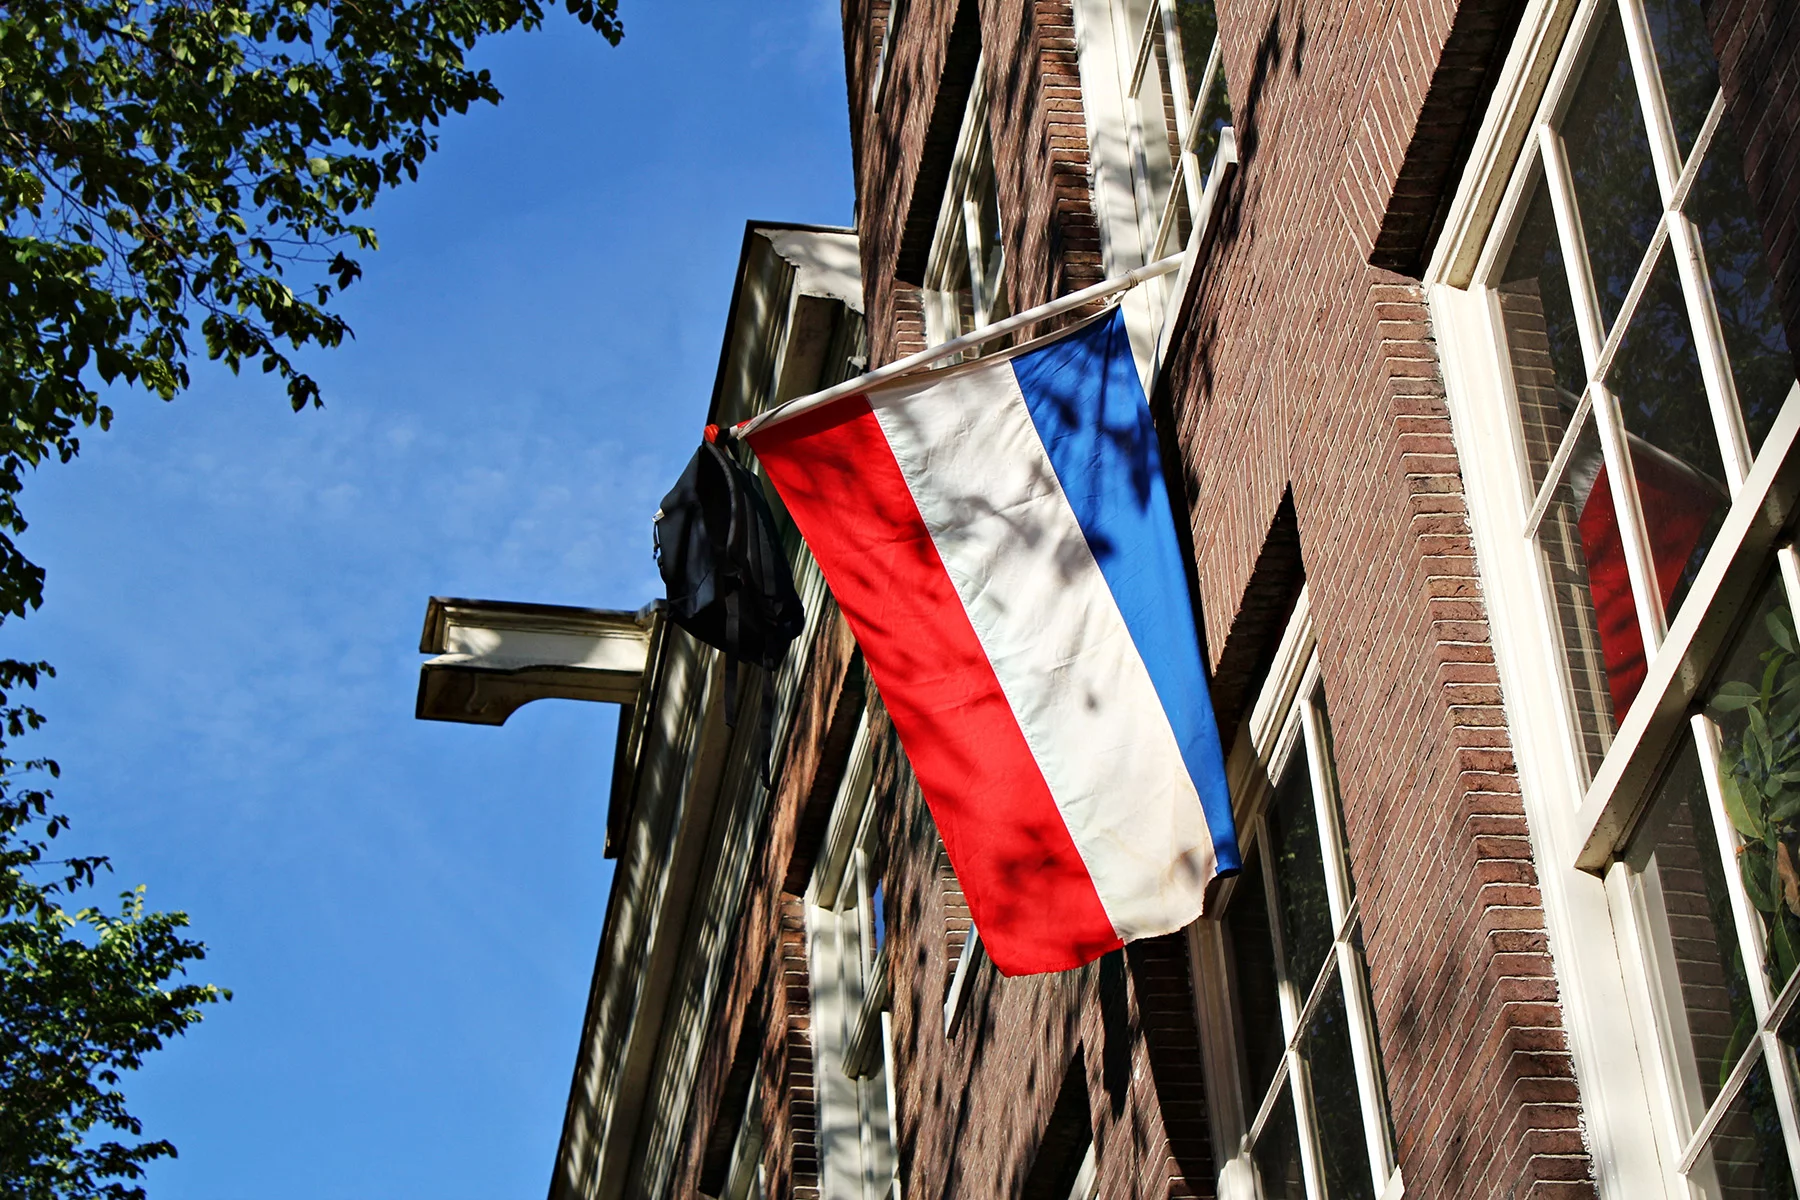 Students typically hang their backpack with a Dutch flag after completing their studies